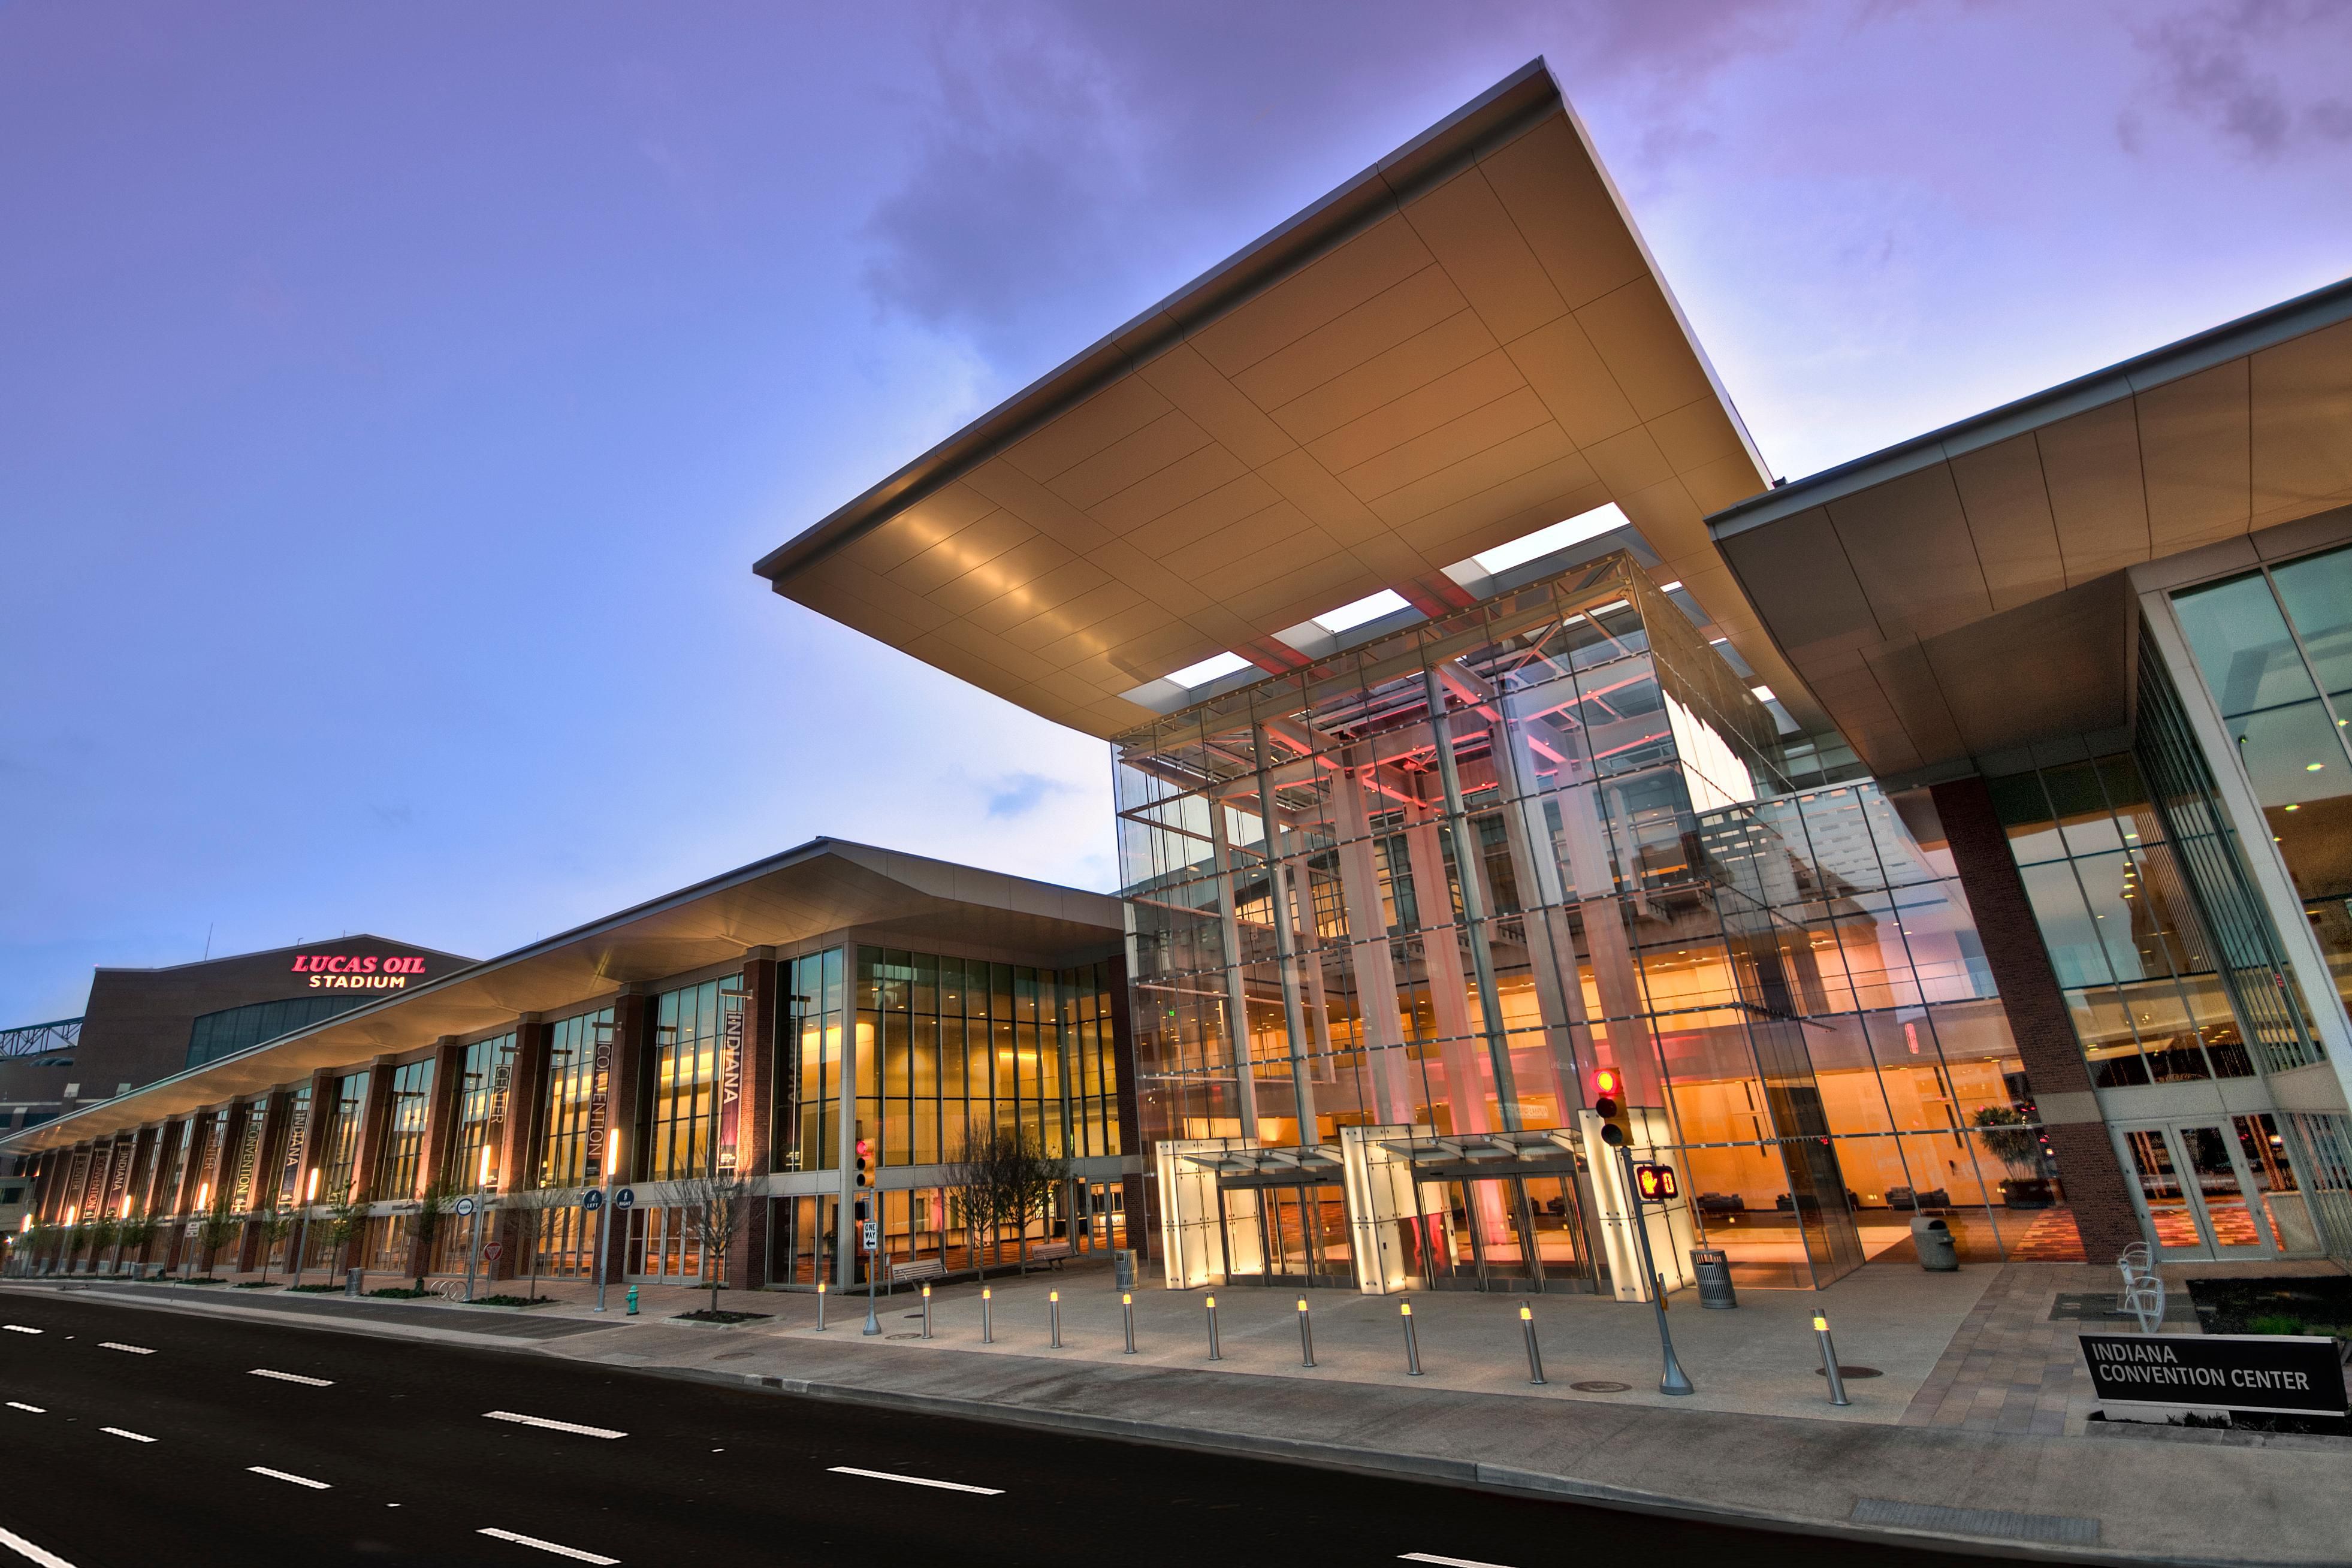 Enjoy the proximity of the Indiana Convention Center